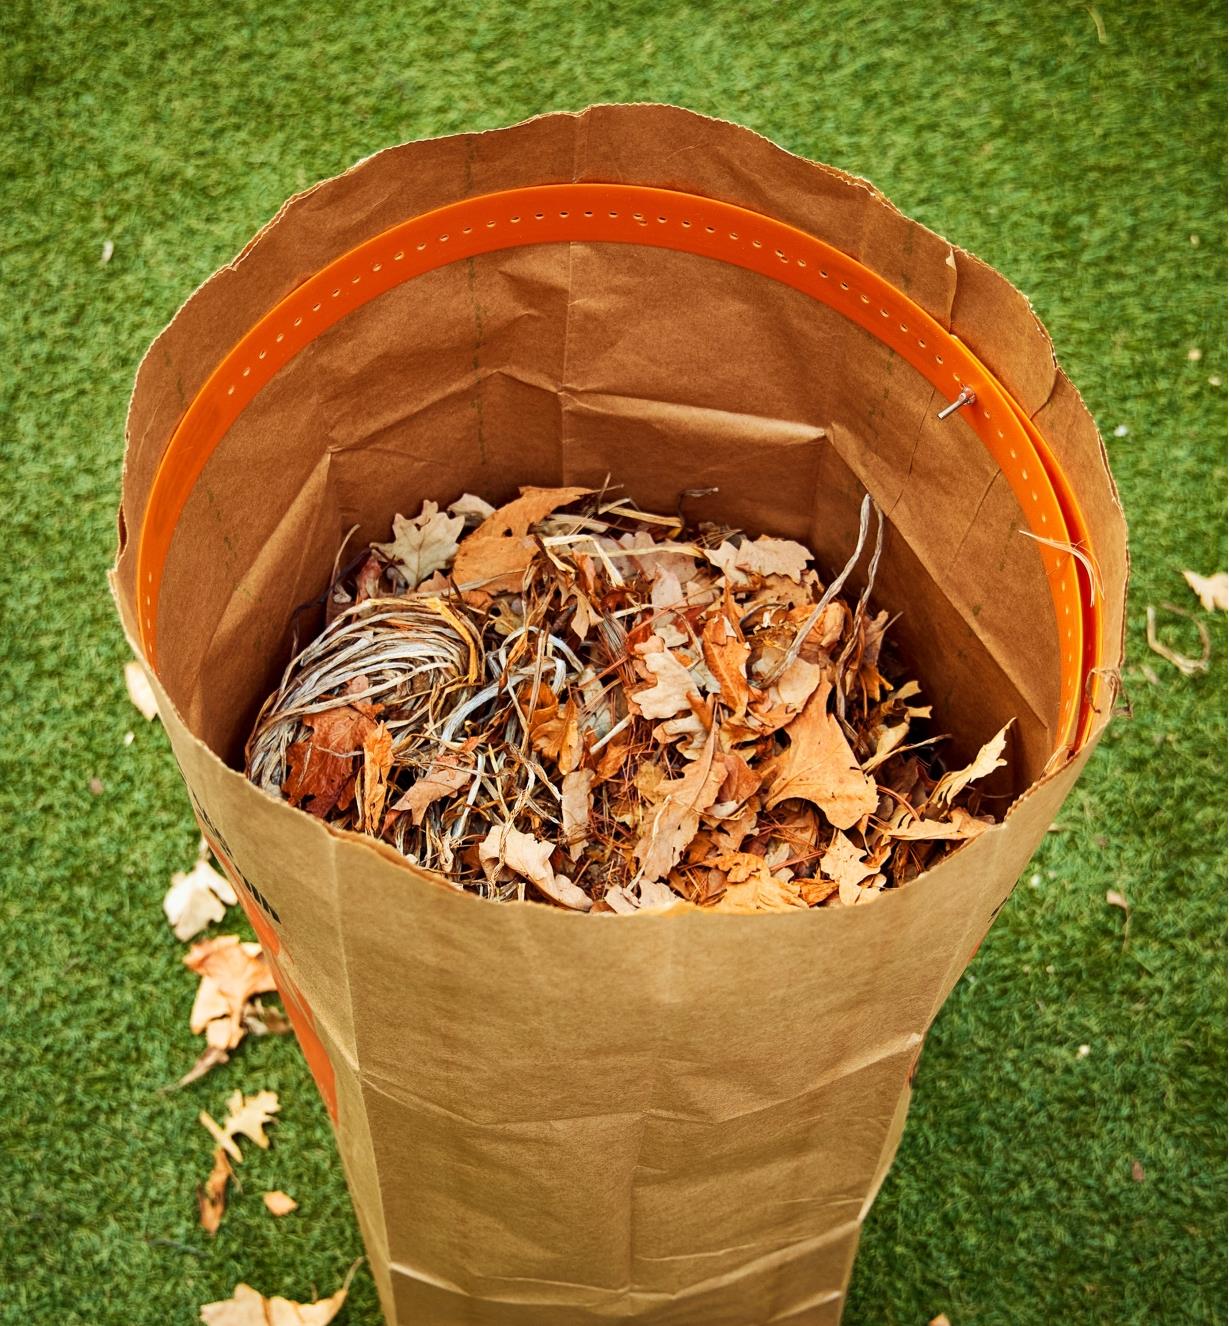 A large paper bag filled with leaves held open by a leaf bag ring